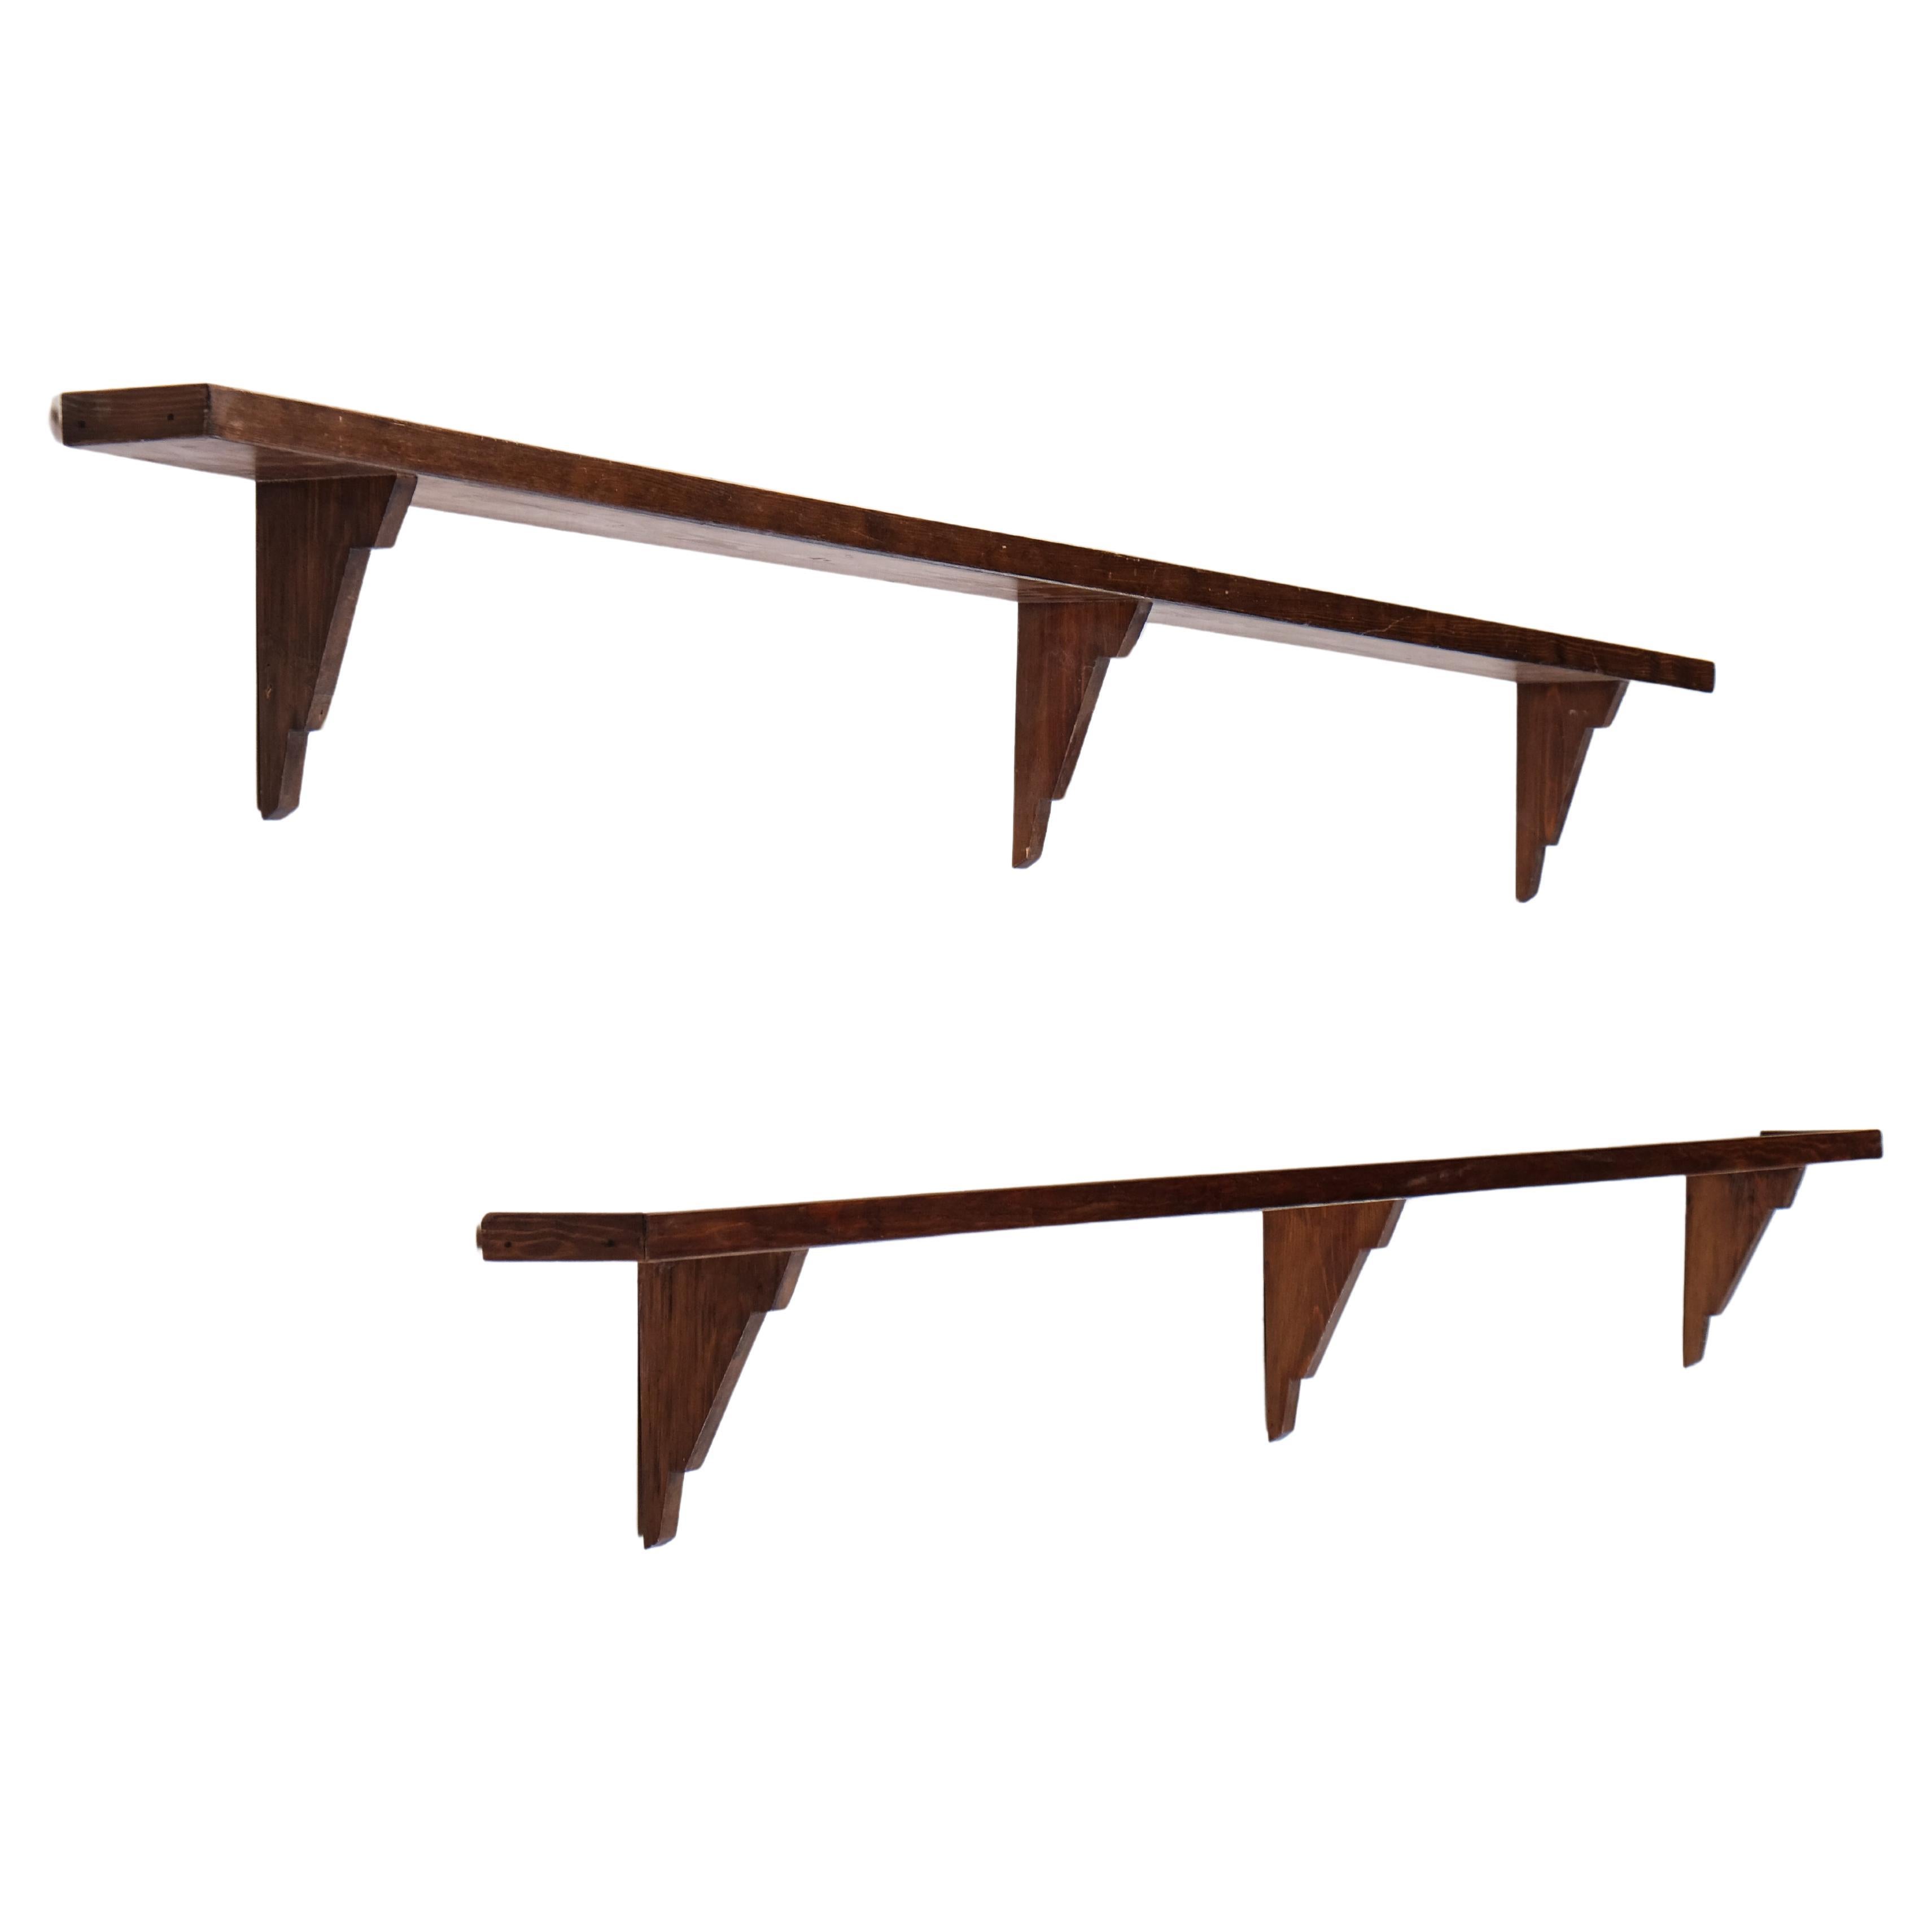 Rare pair of pine wall shelves, Sweden, 1930s For Sale 1